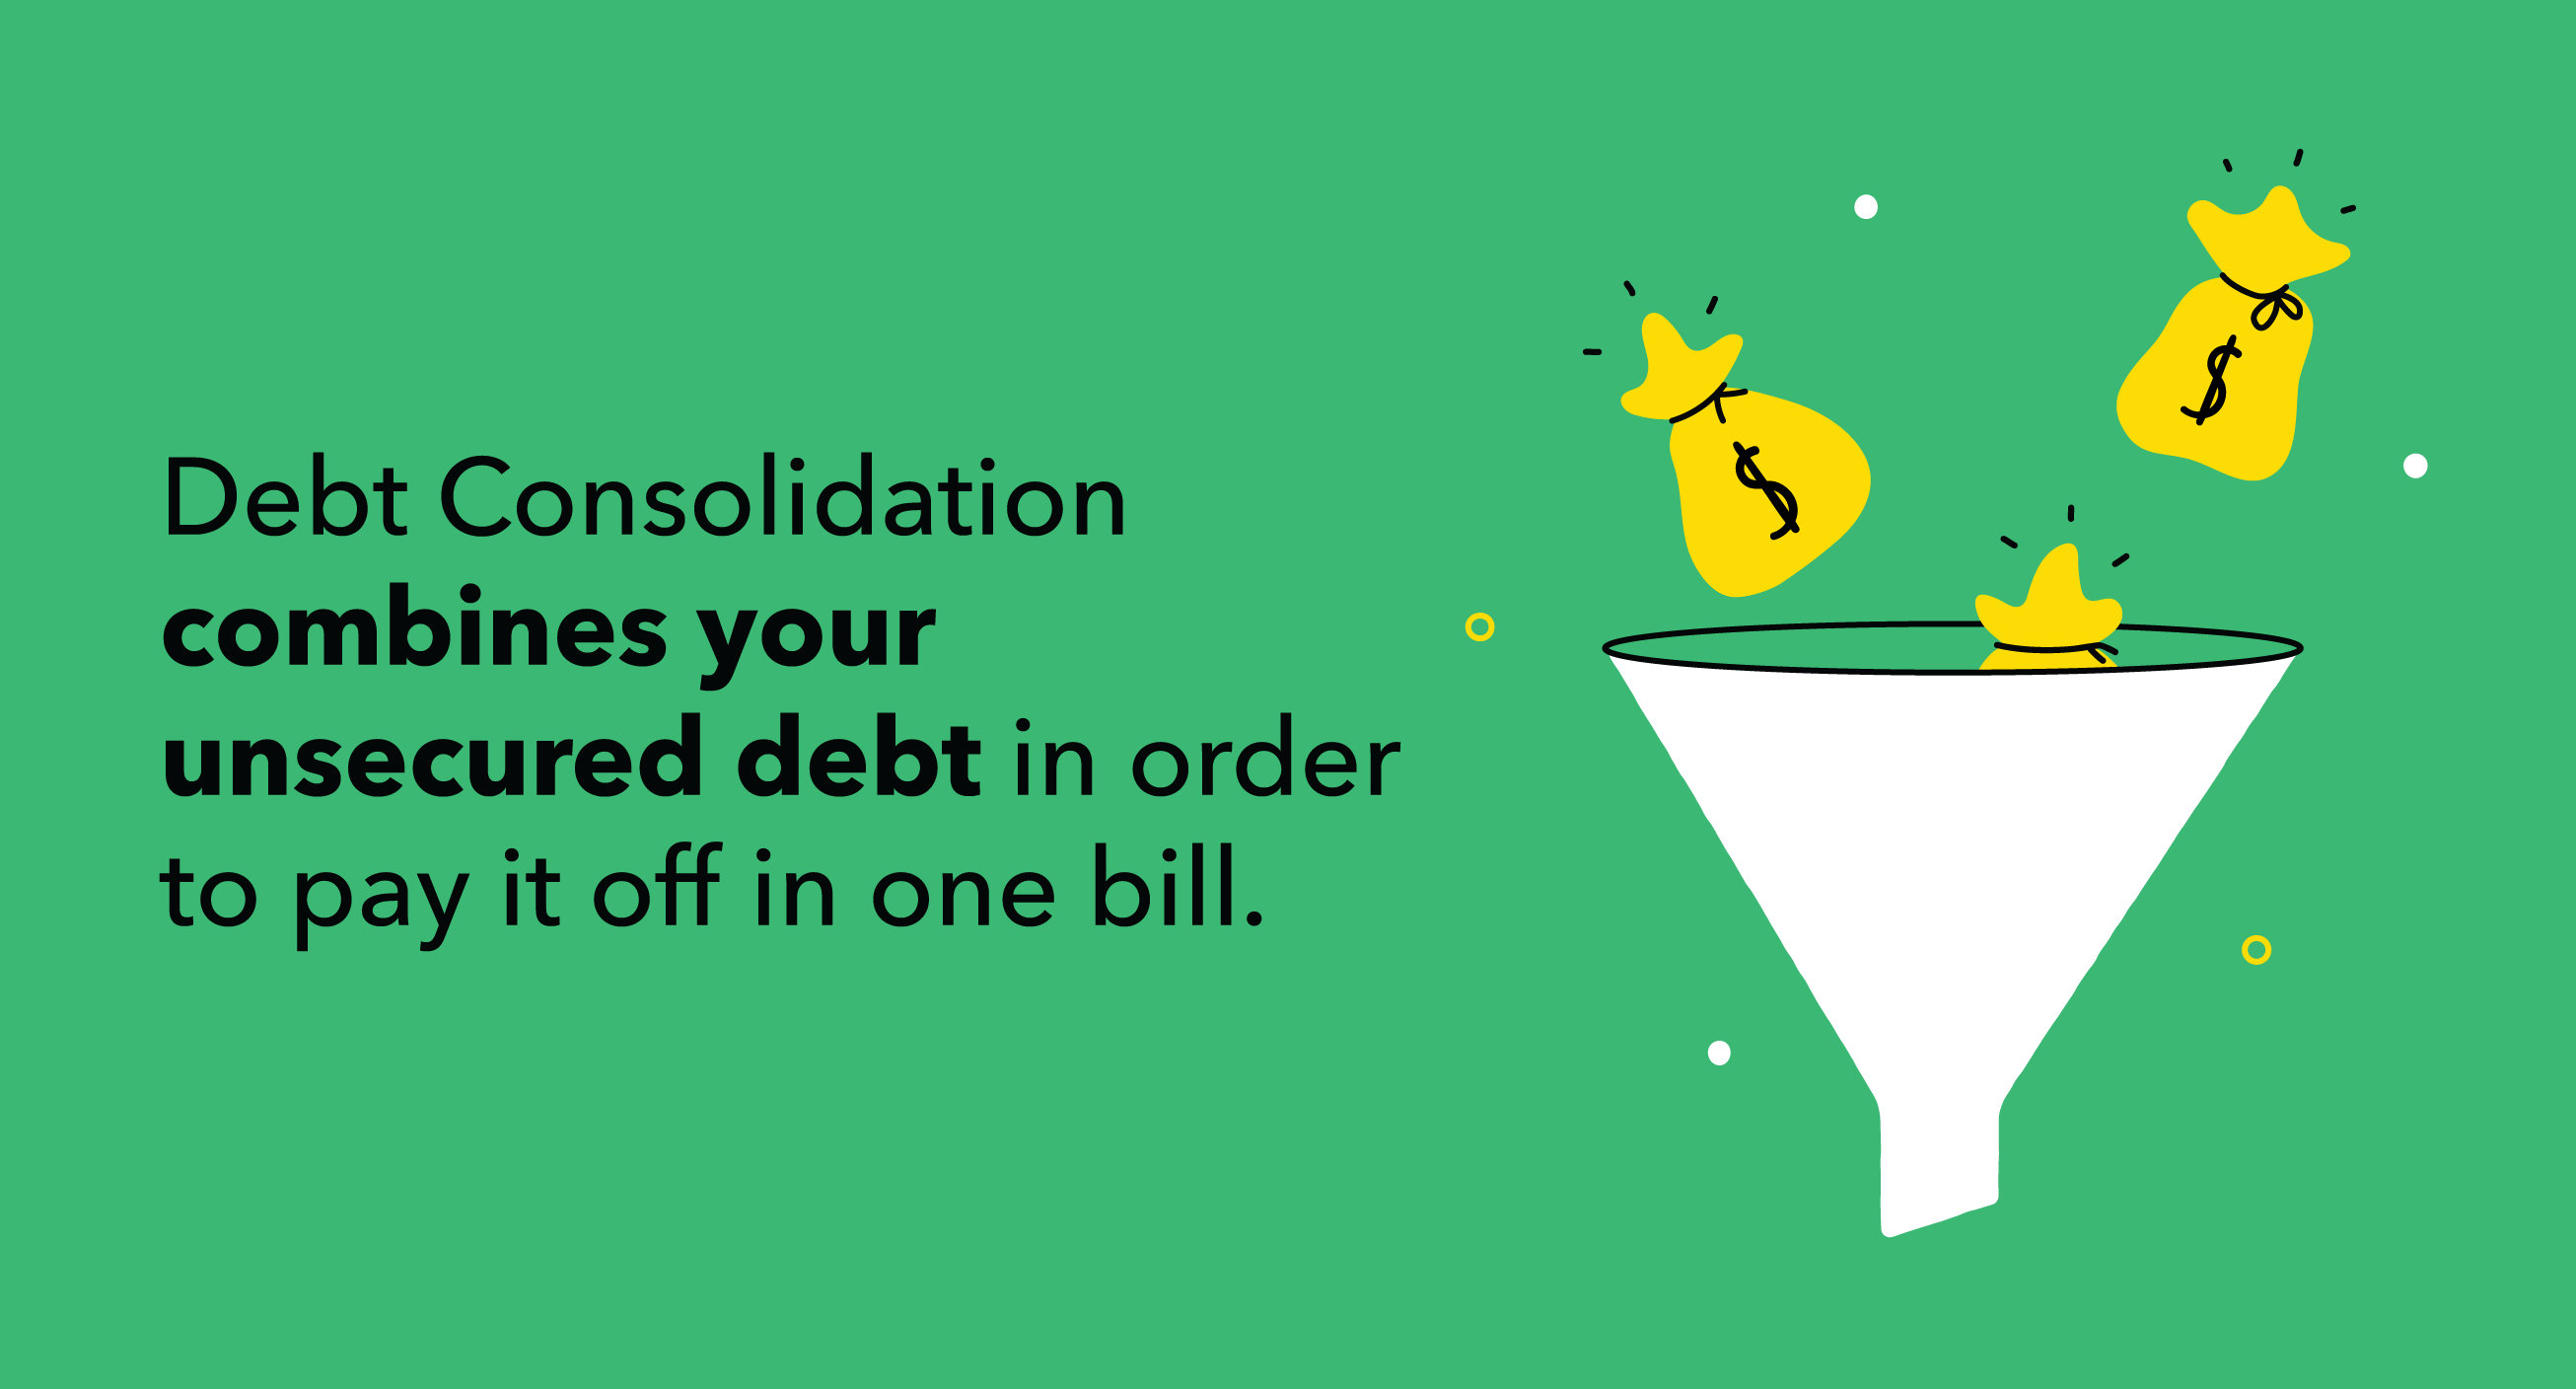 Debt Consolidation combines your unsecured debt in order to pay it off in one bill. 